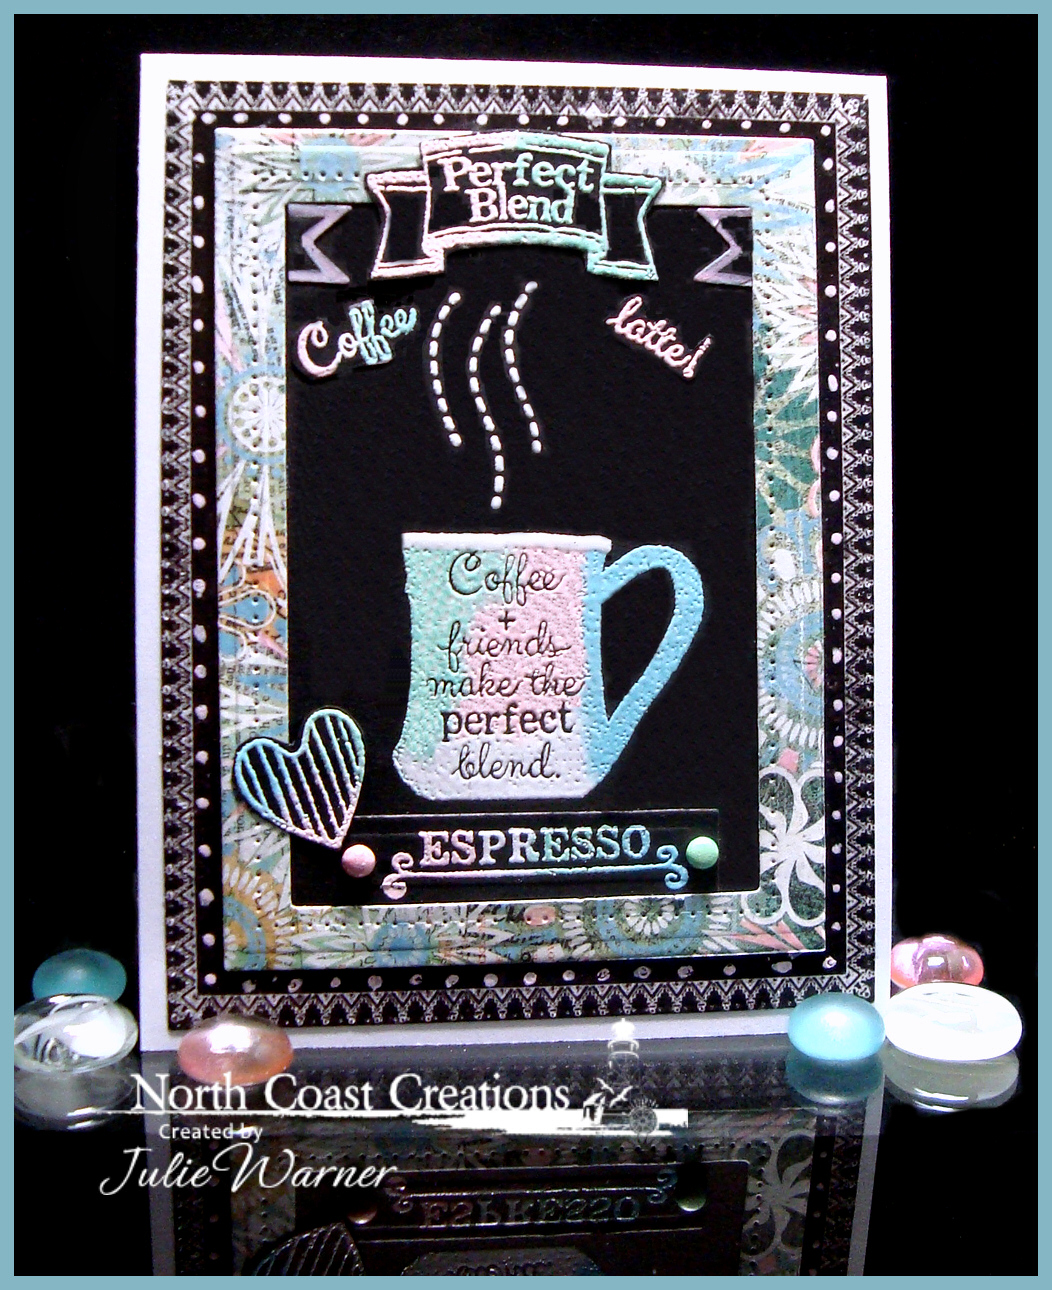 Stamps - North Coast Creations Warm My Heart, What’s Brewin'?, Our Daily Bread Designs Custom Flourish Star Pattern Die, Our Daily Bread Designs Chalkboard Paper Collection